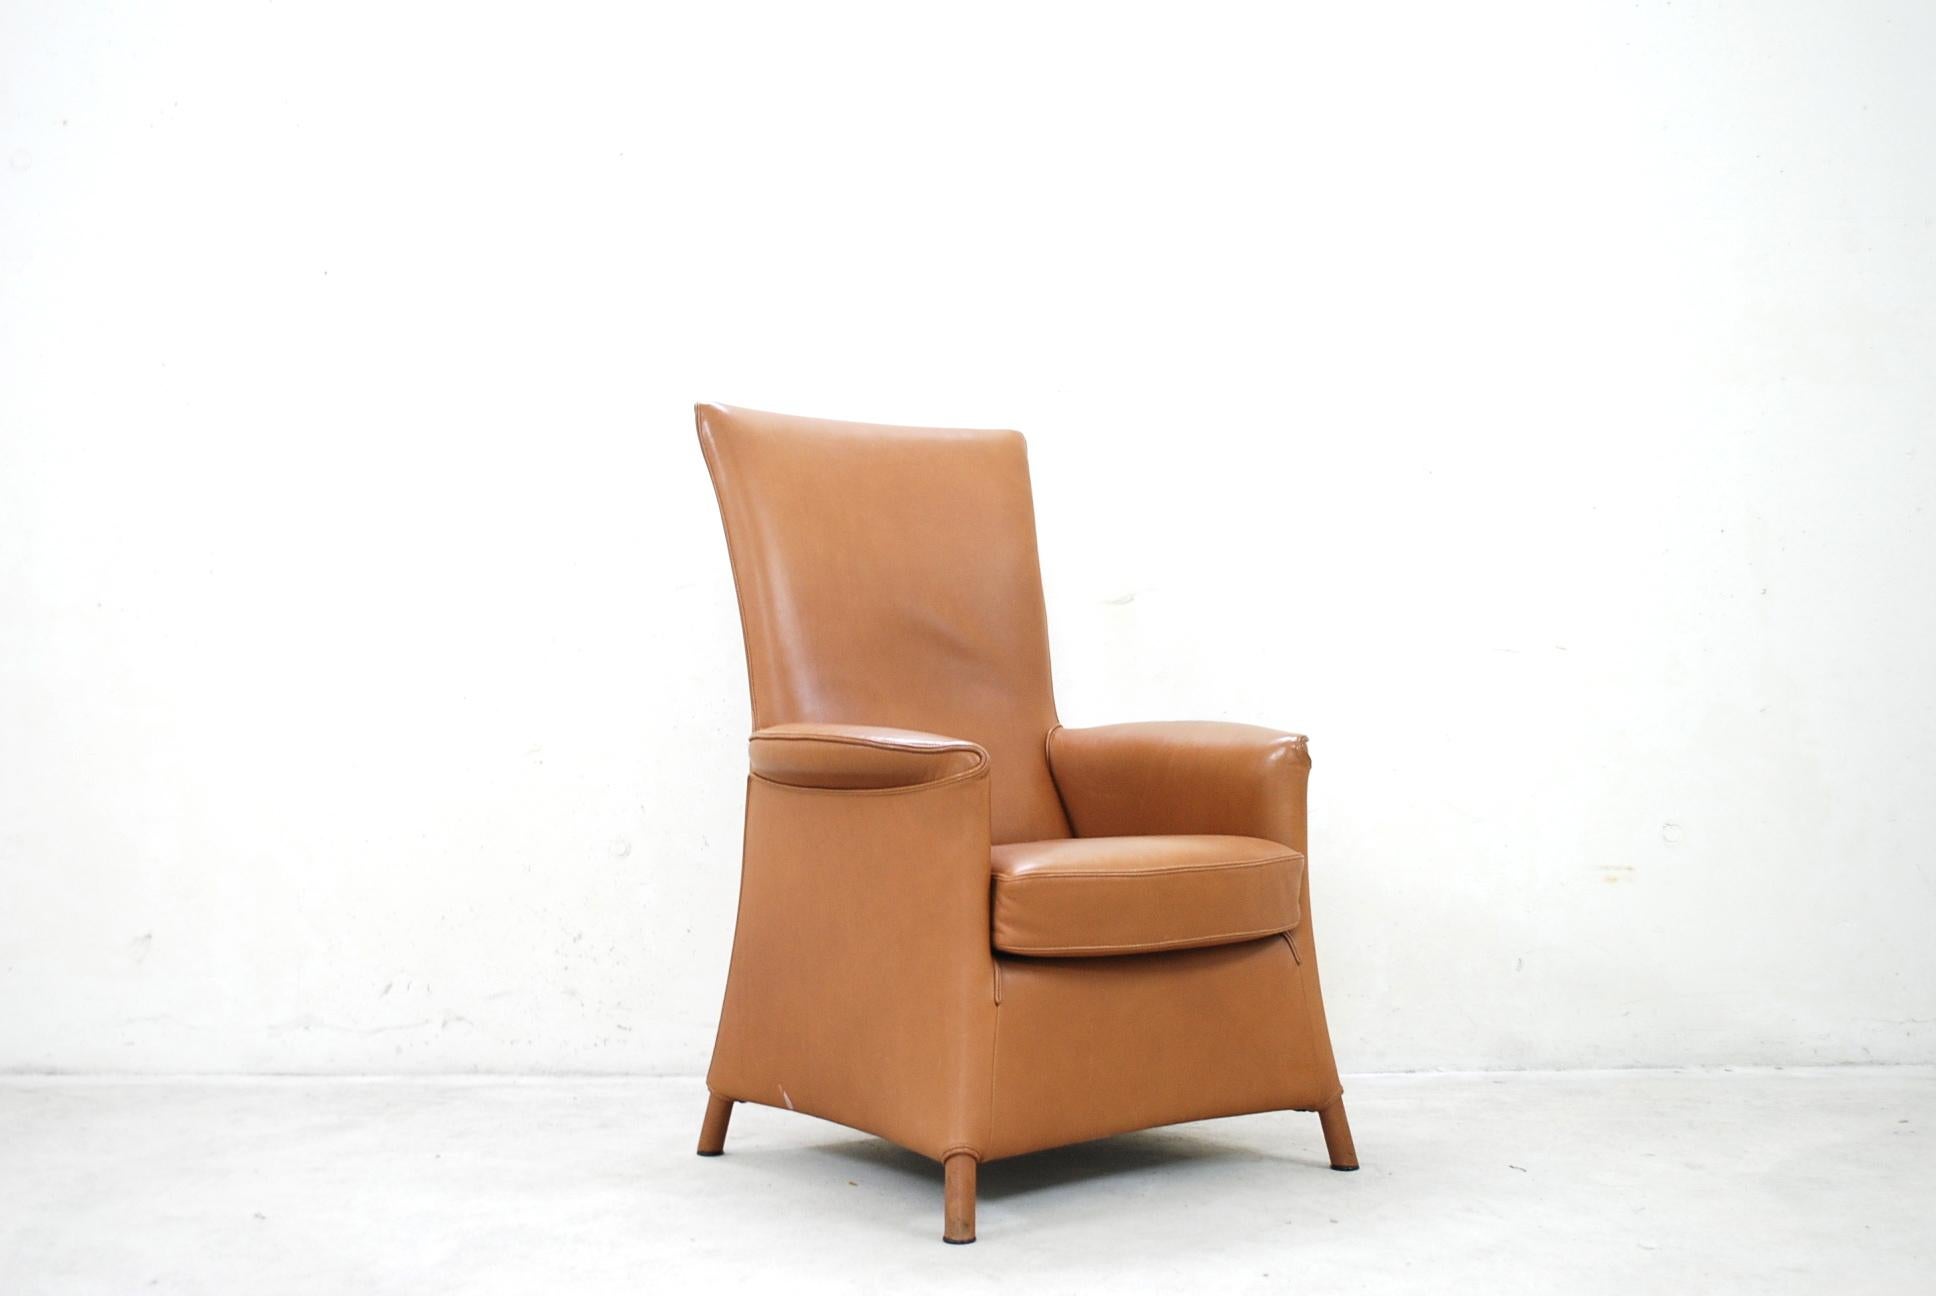 Leather armchair by Austrian, Italian architect Paolo Piva.
Model Alta manufactured by Wittmann.
Cognac aniline leather. The design is a basic design from the model aura.
Wittmann is a Austrian company manufacturing high-quality upholstered